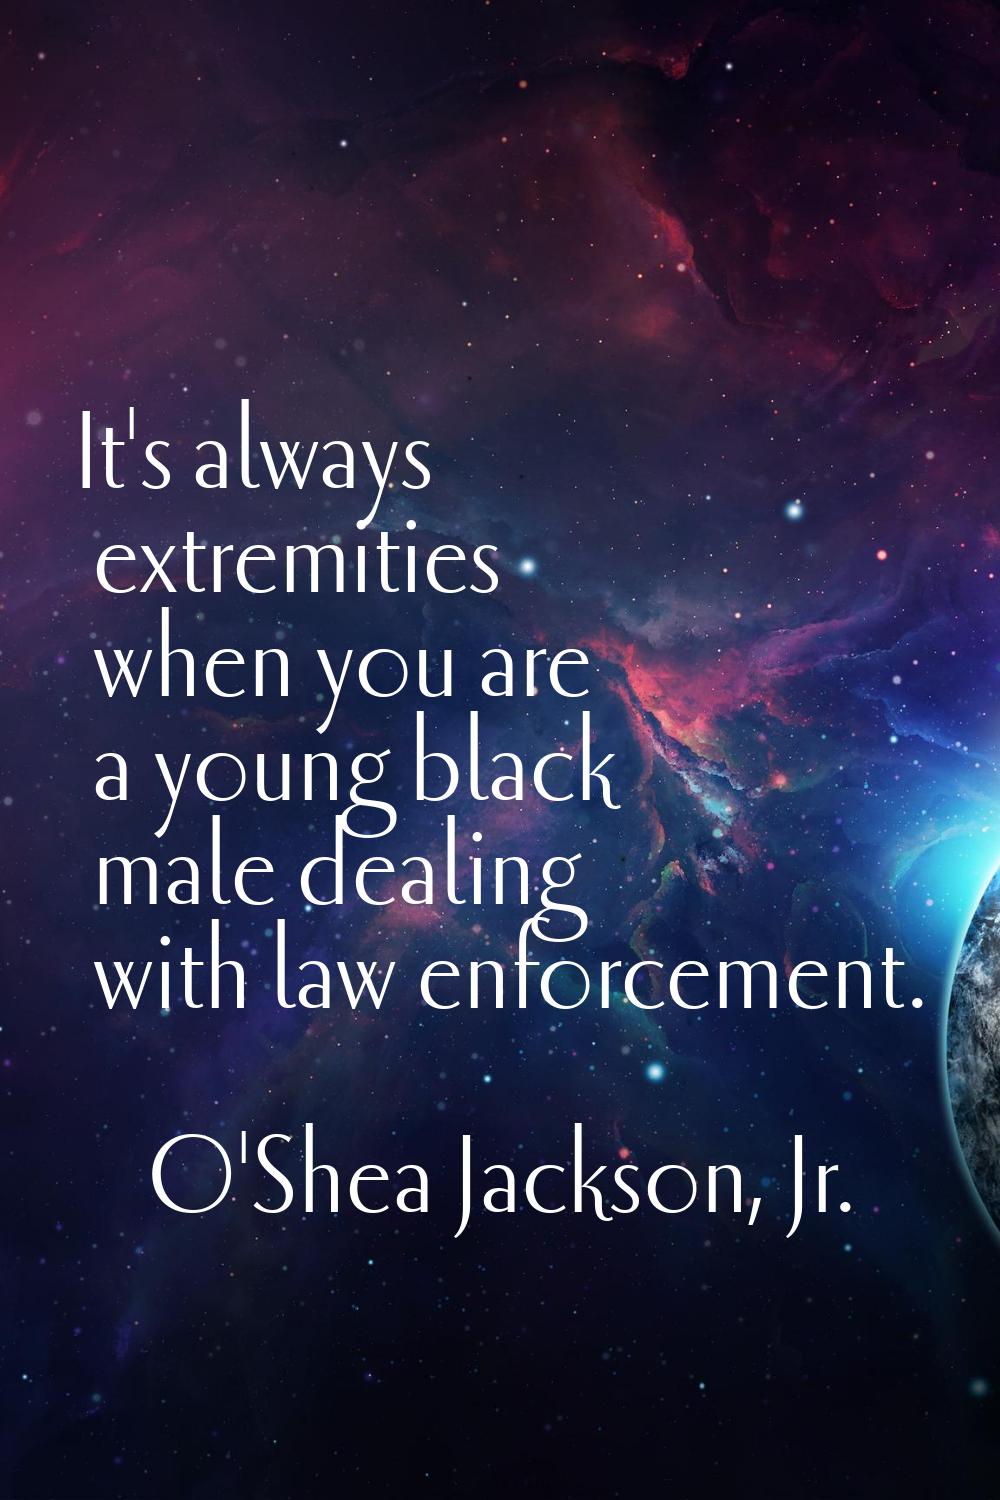 It's always extremities when you are a young black male dealing with law enforcement.